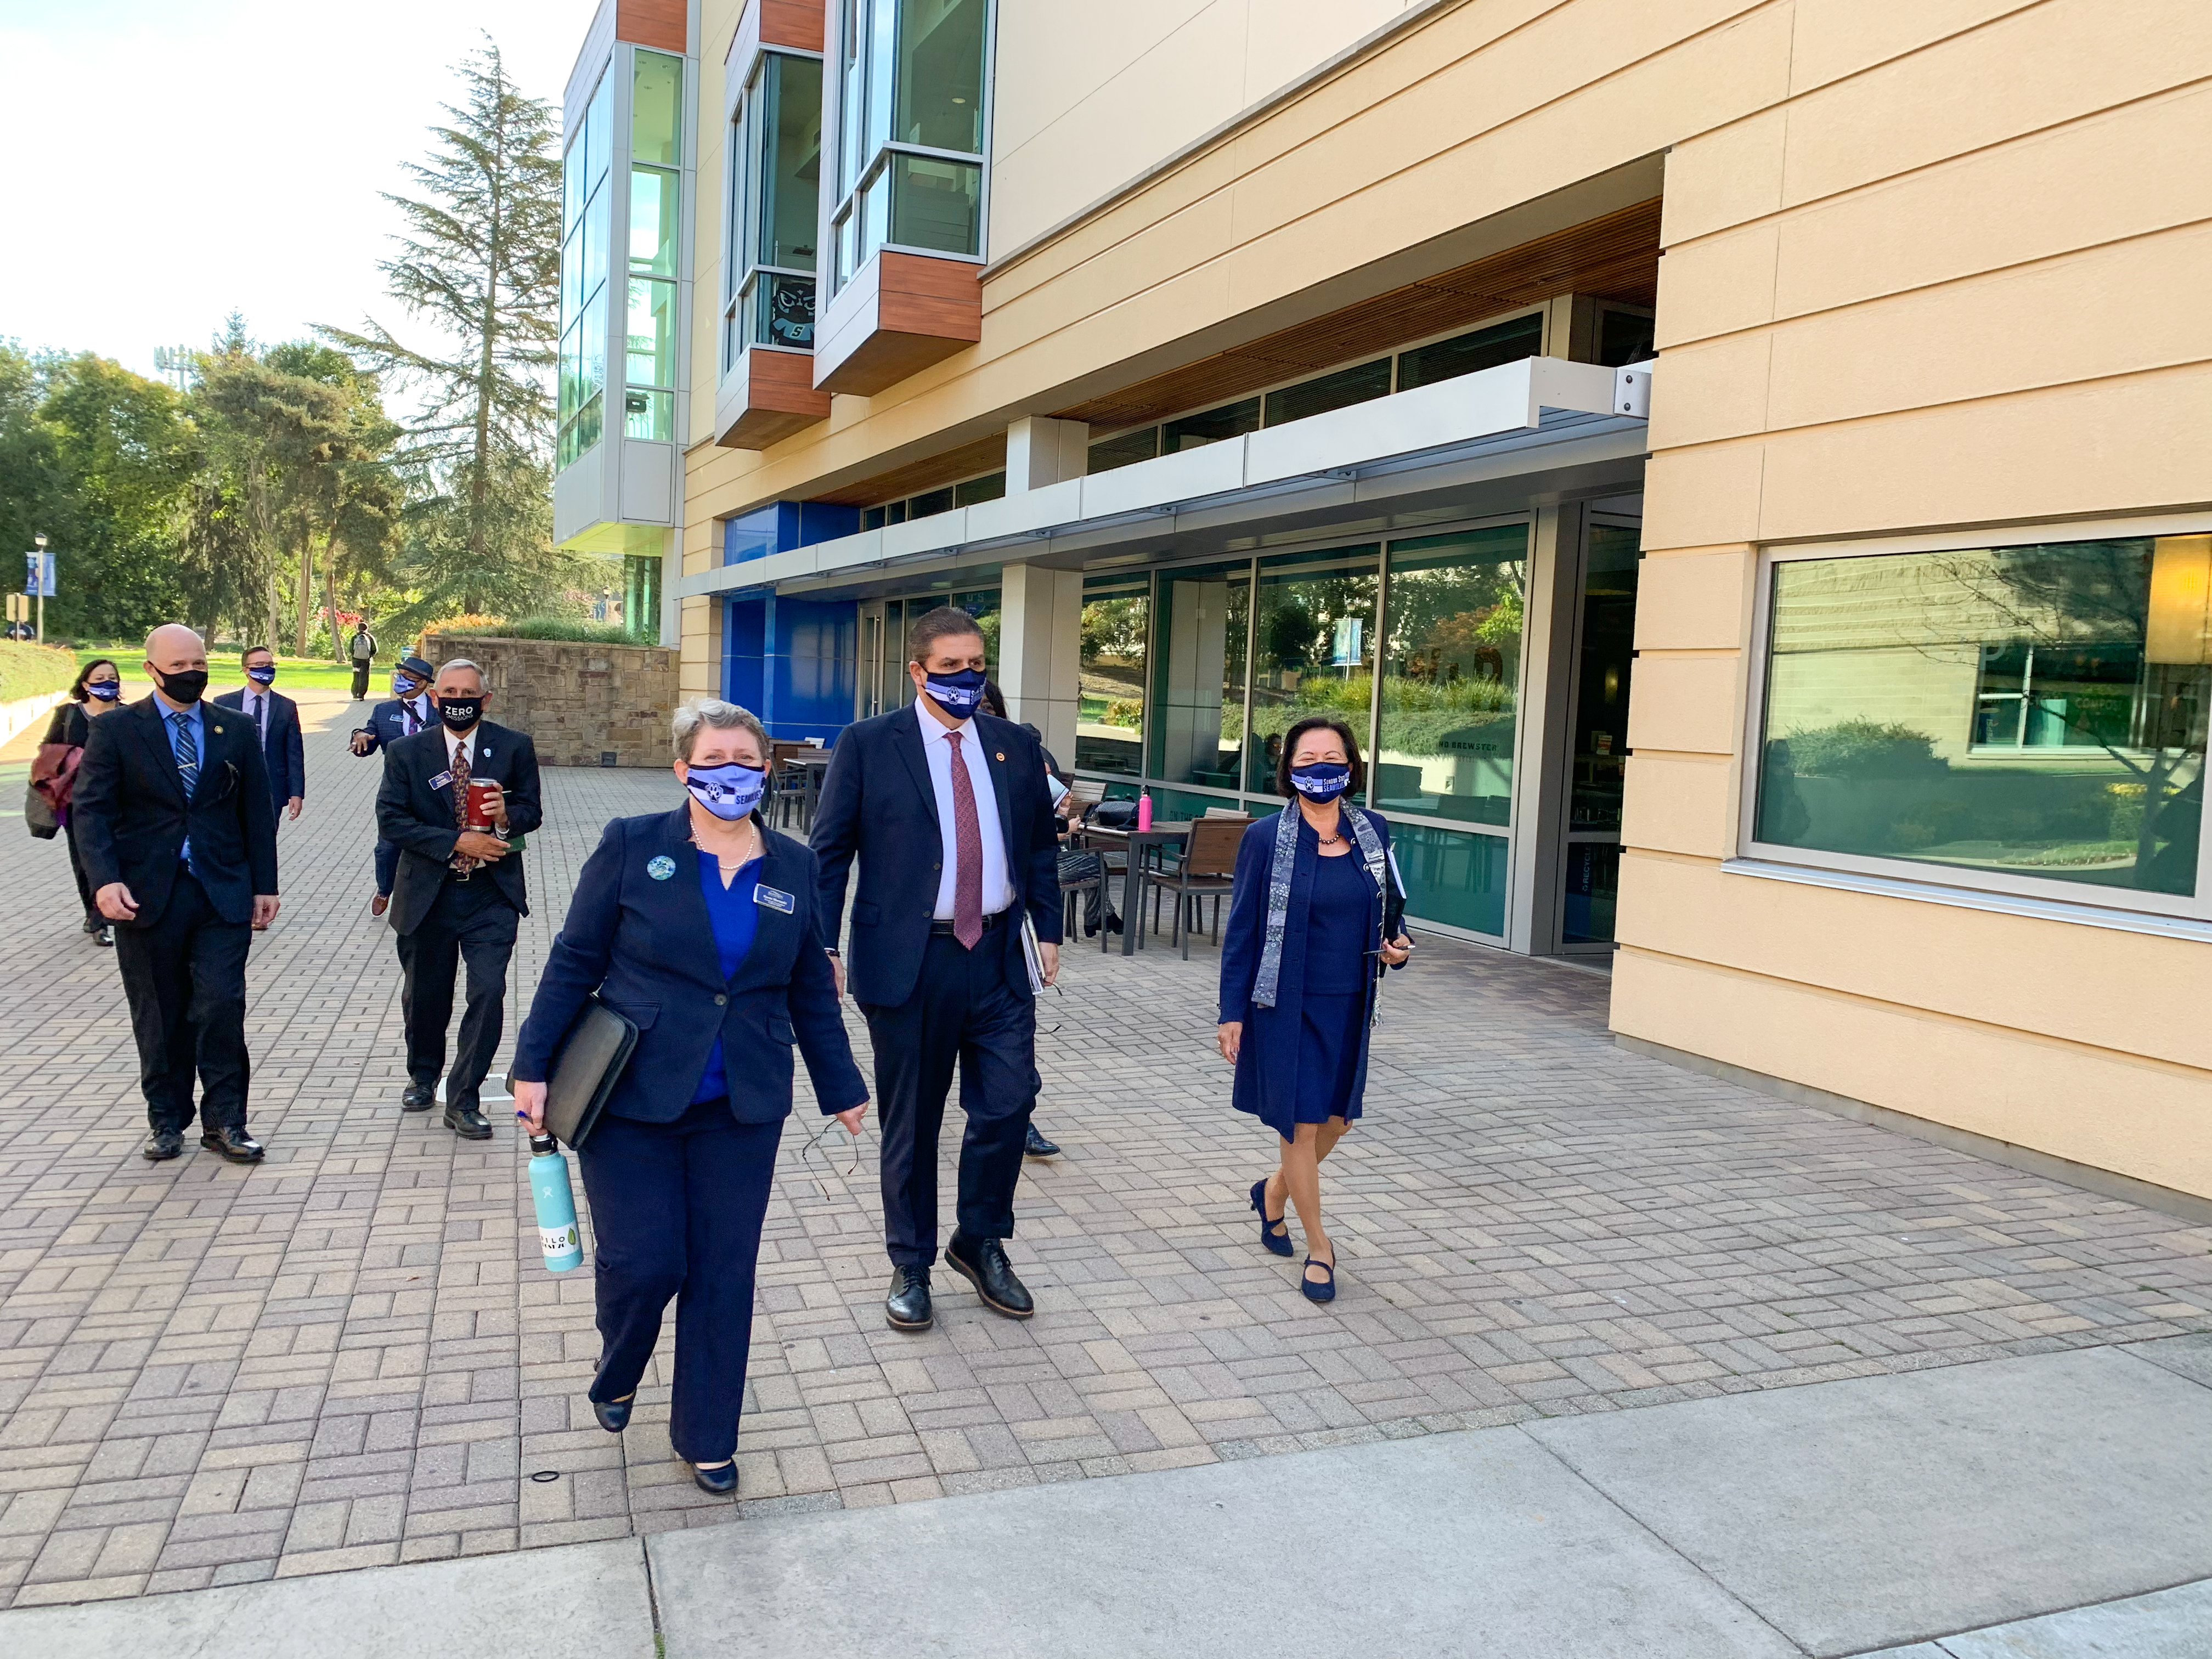 Chancellor Castro walks with members of SSU's cabinet 